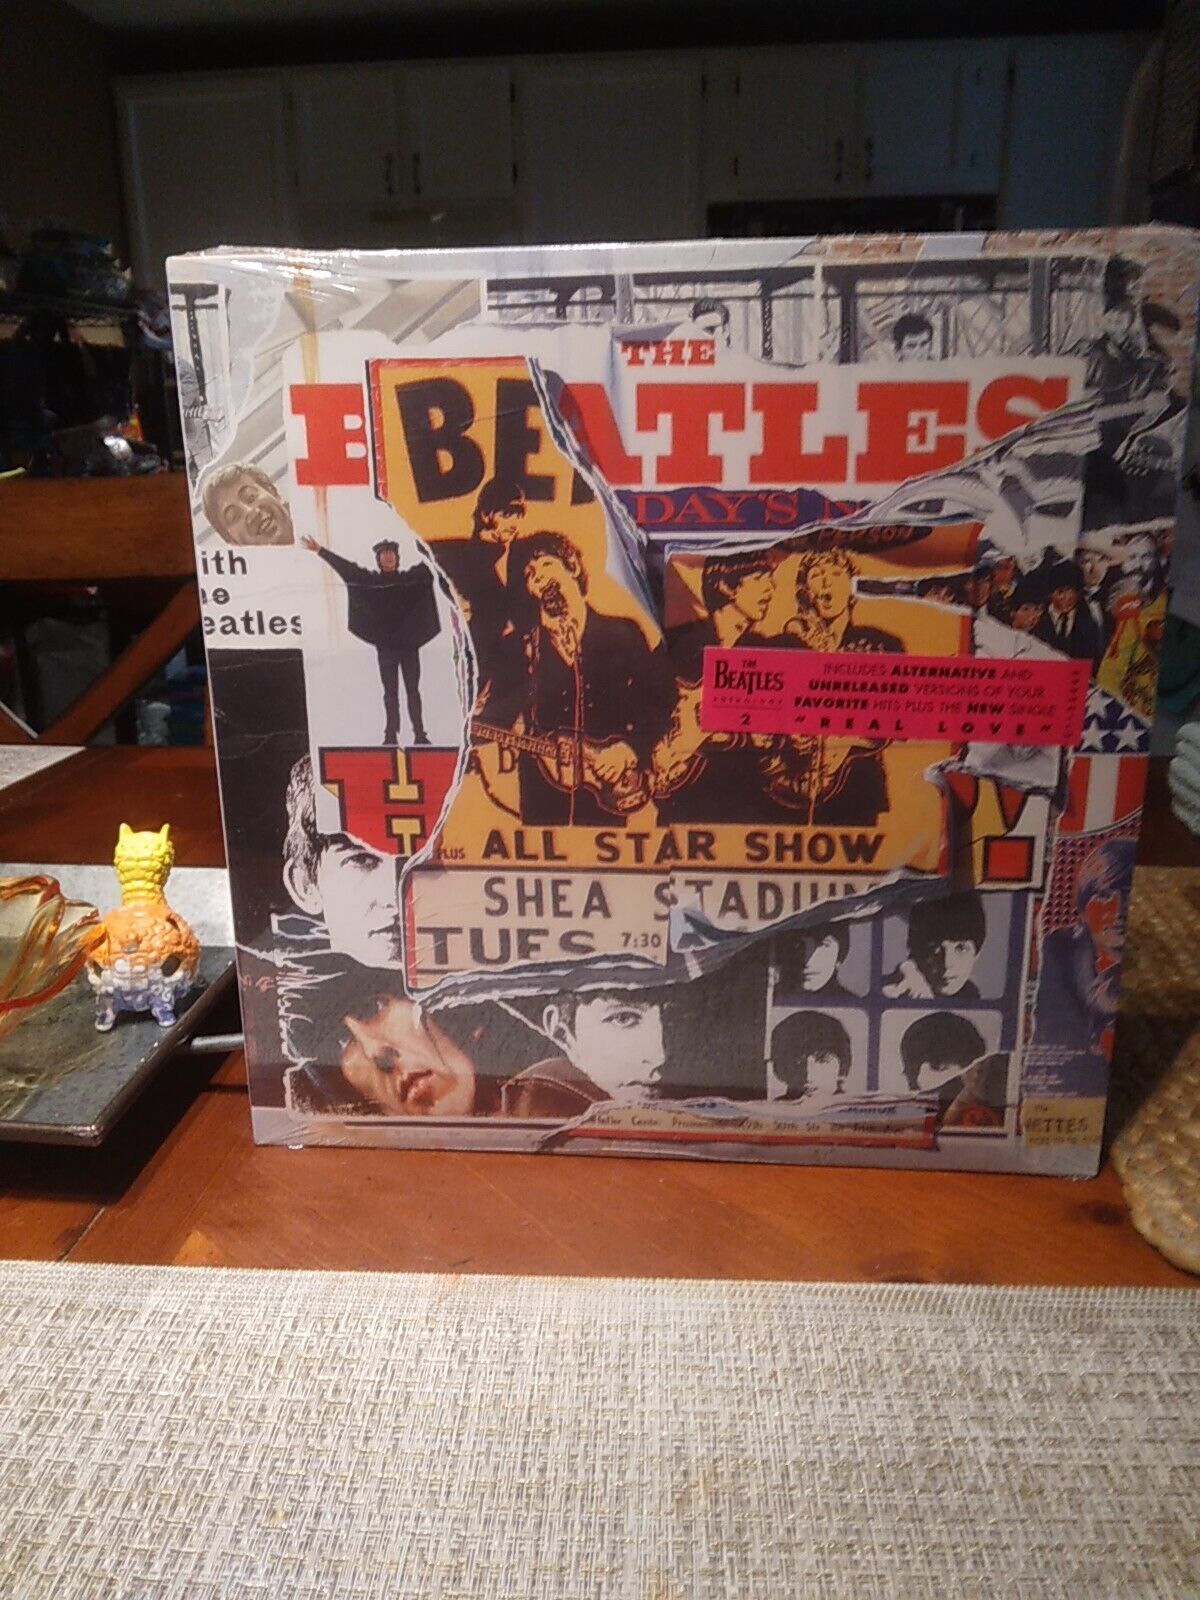 Anthology, Vol. 2 by The Beatles (Record, 2008)